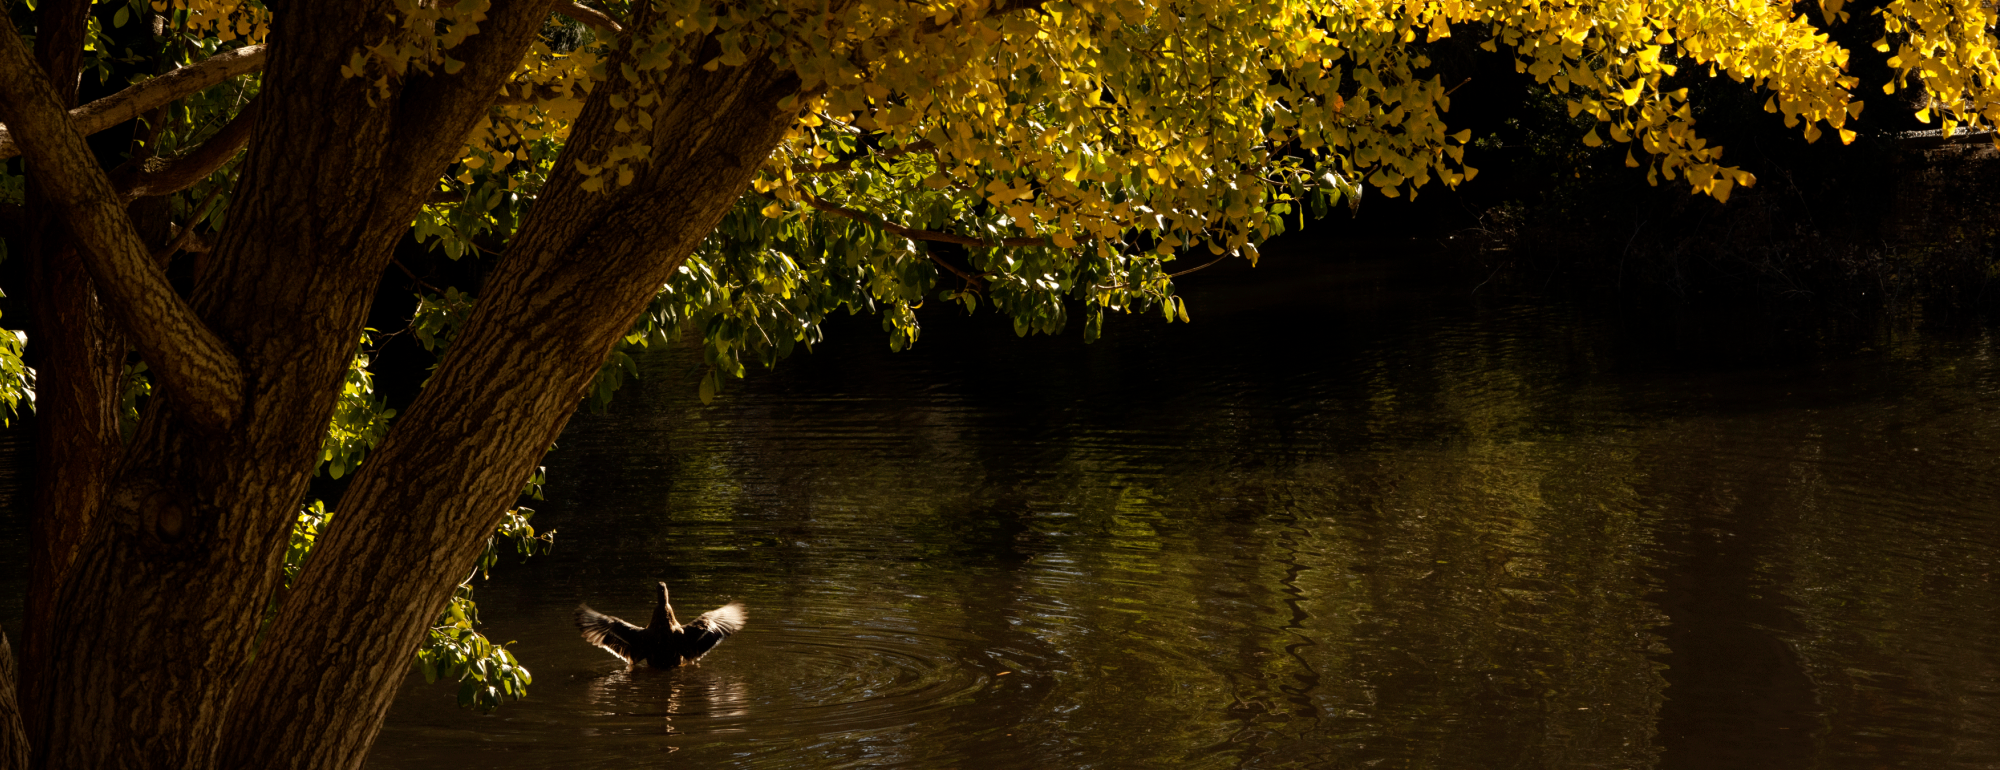 The fall colors of yellow are seen in the Arboretum as a duck passes on November 16, 2022.